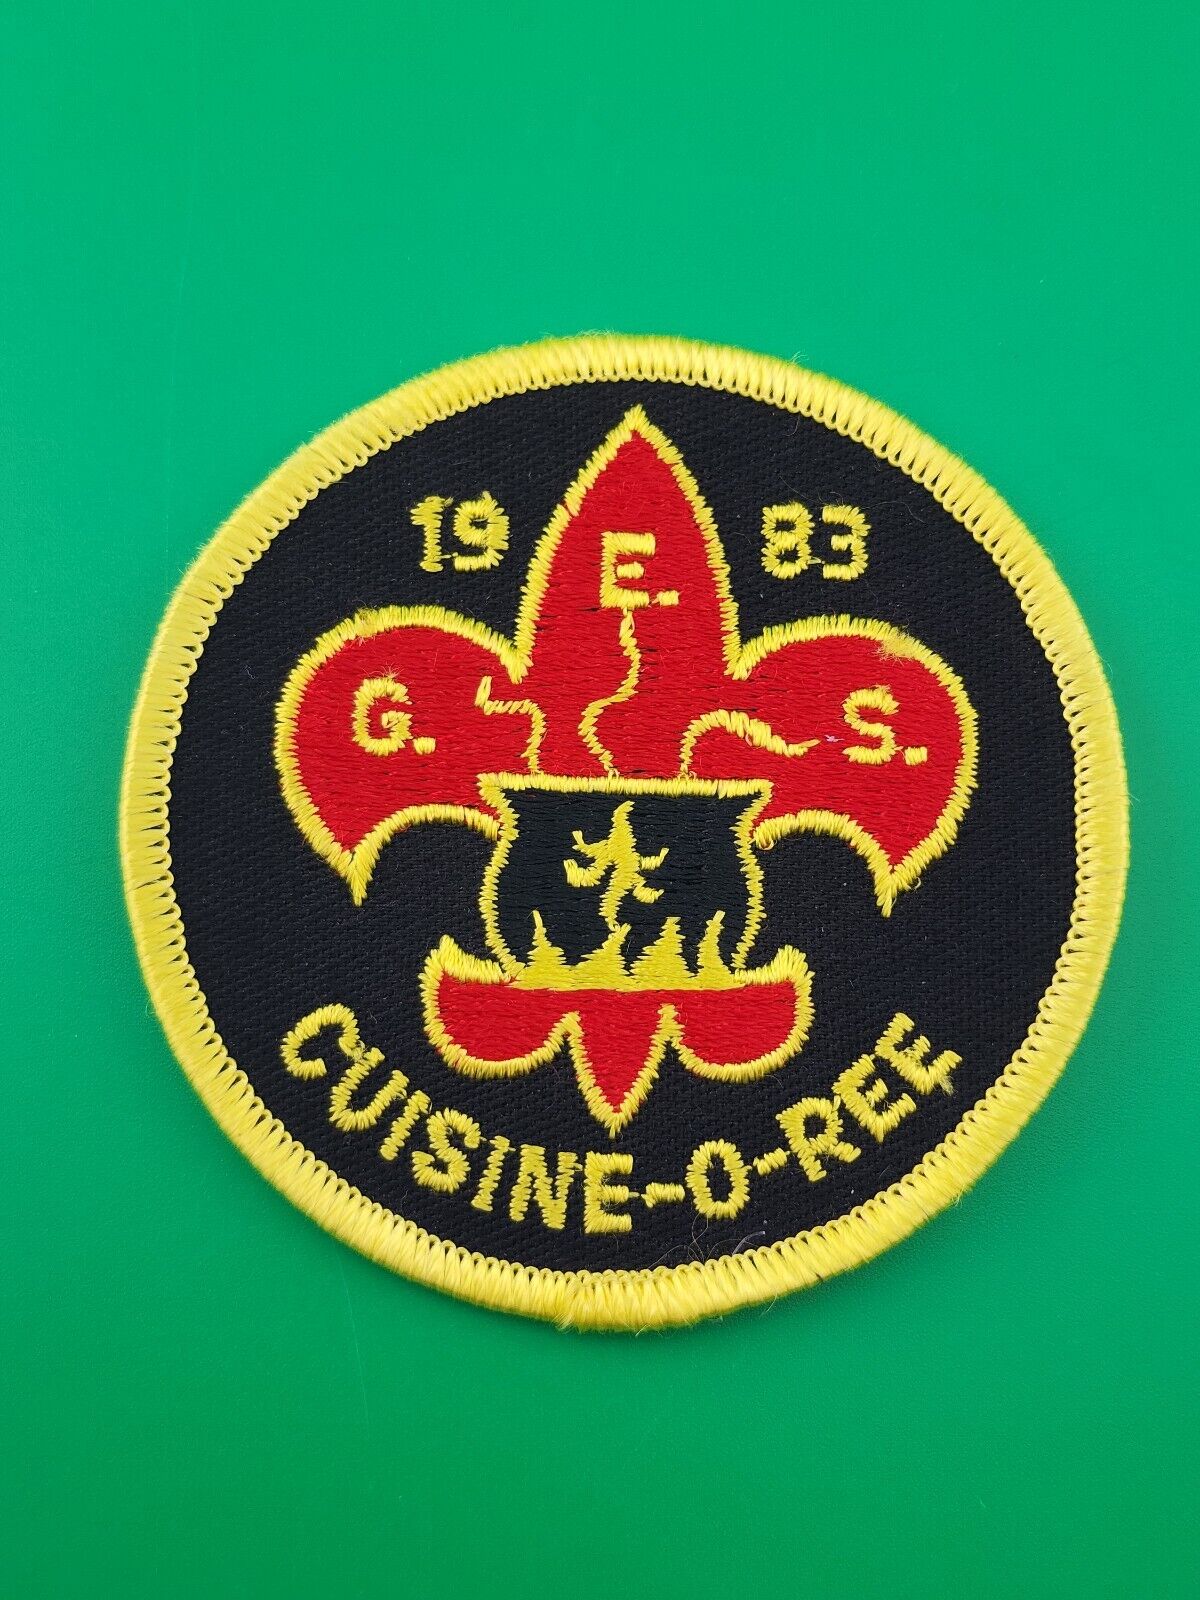 1983  G E S Cuisine-O-Ree Patch BSA Boy Scouts Of America NEW